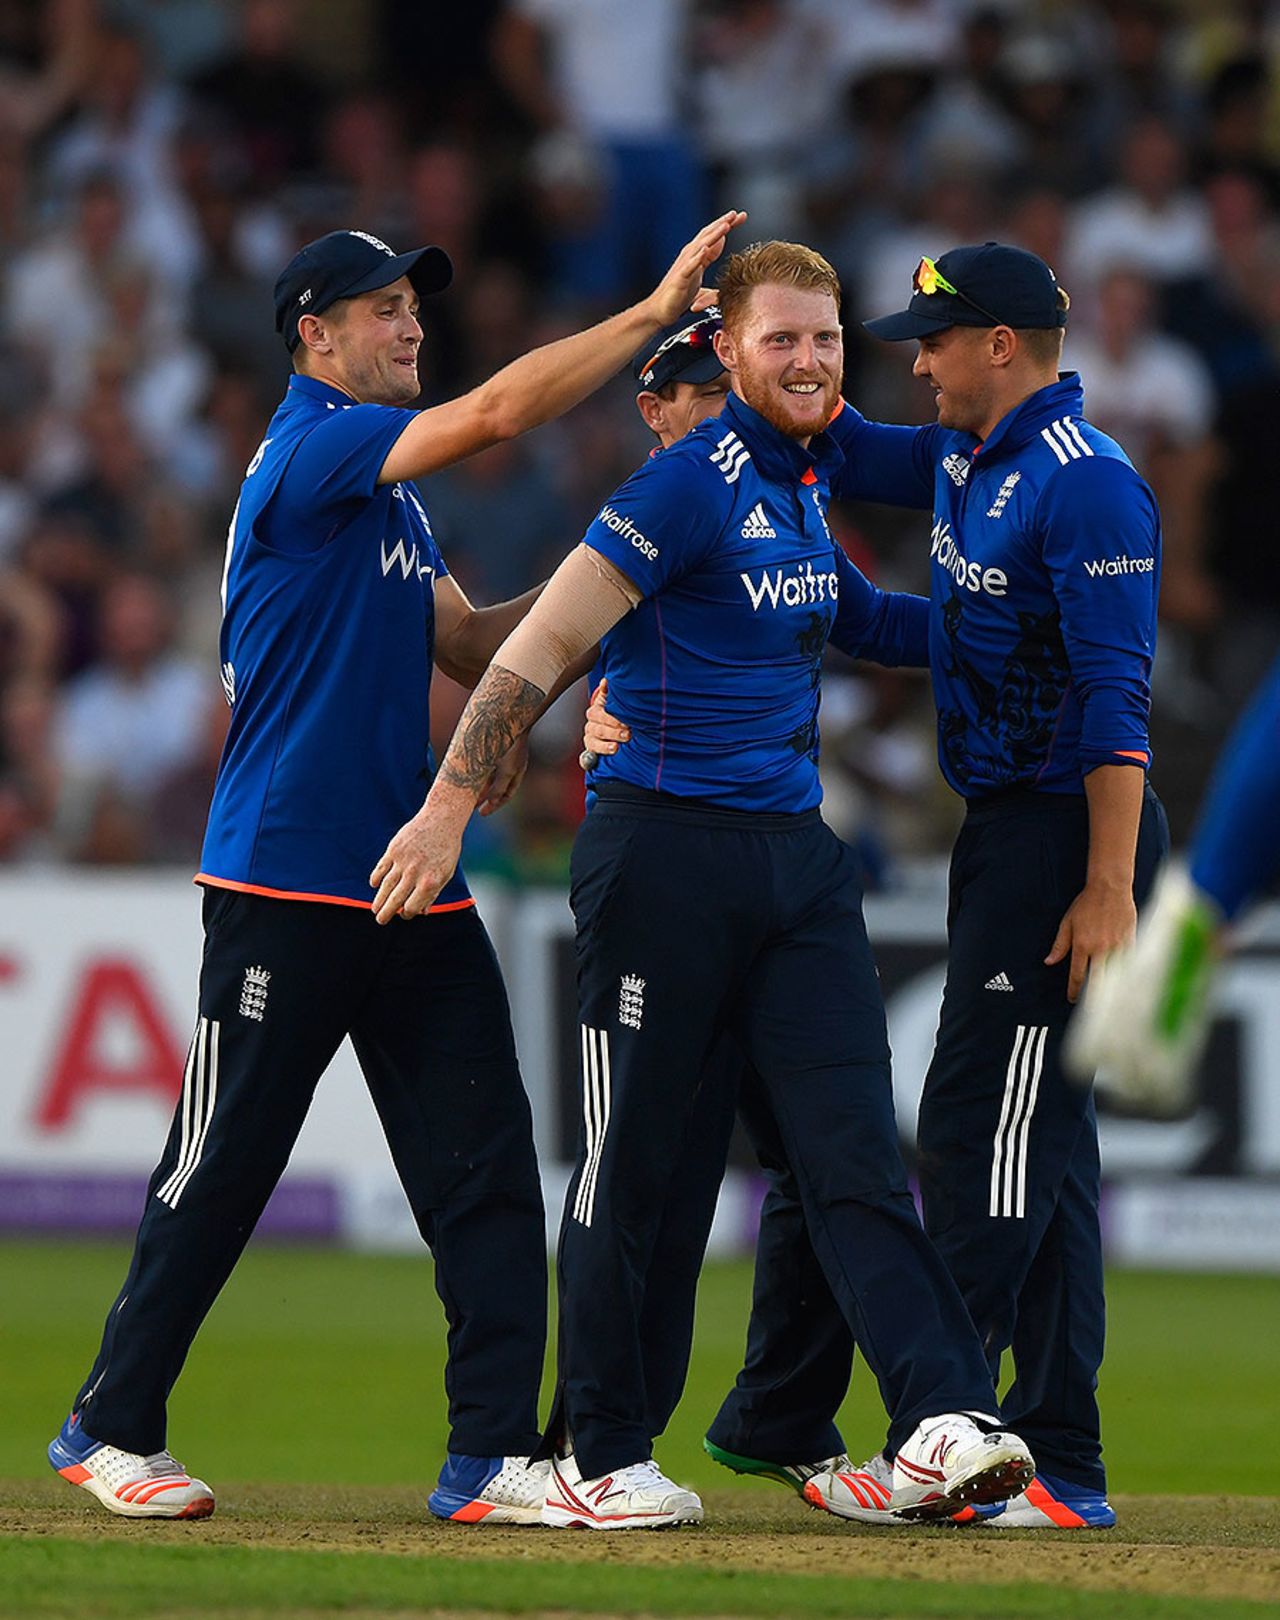 Ben Stokes removed Babar Azam in his first spell since returning from a calf injury, England v Pakistan, 3rd ODI, Trent Bridge, August 30, 2016